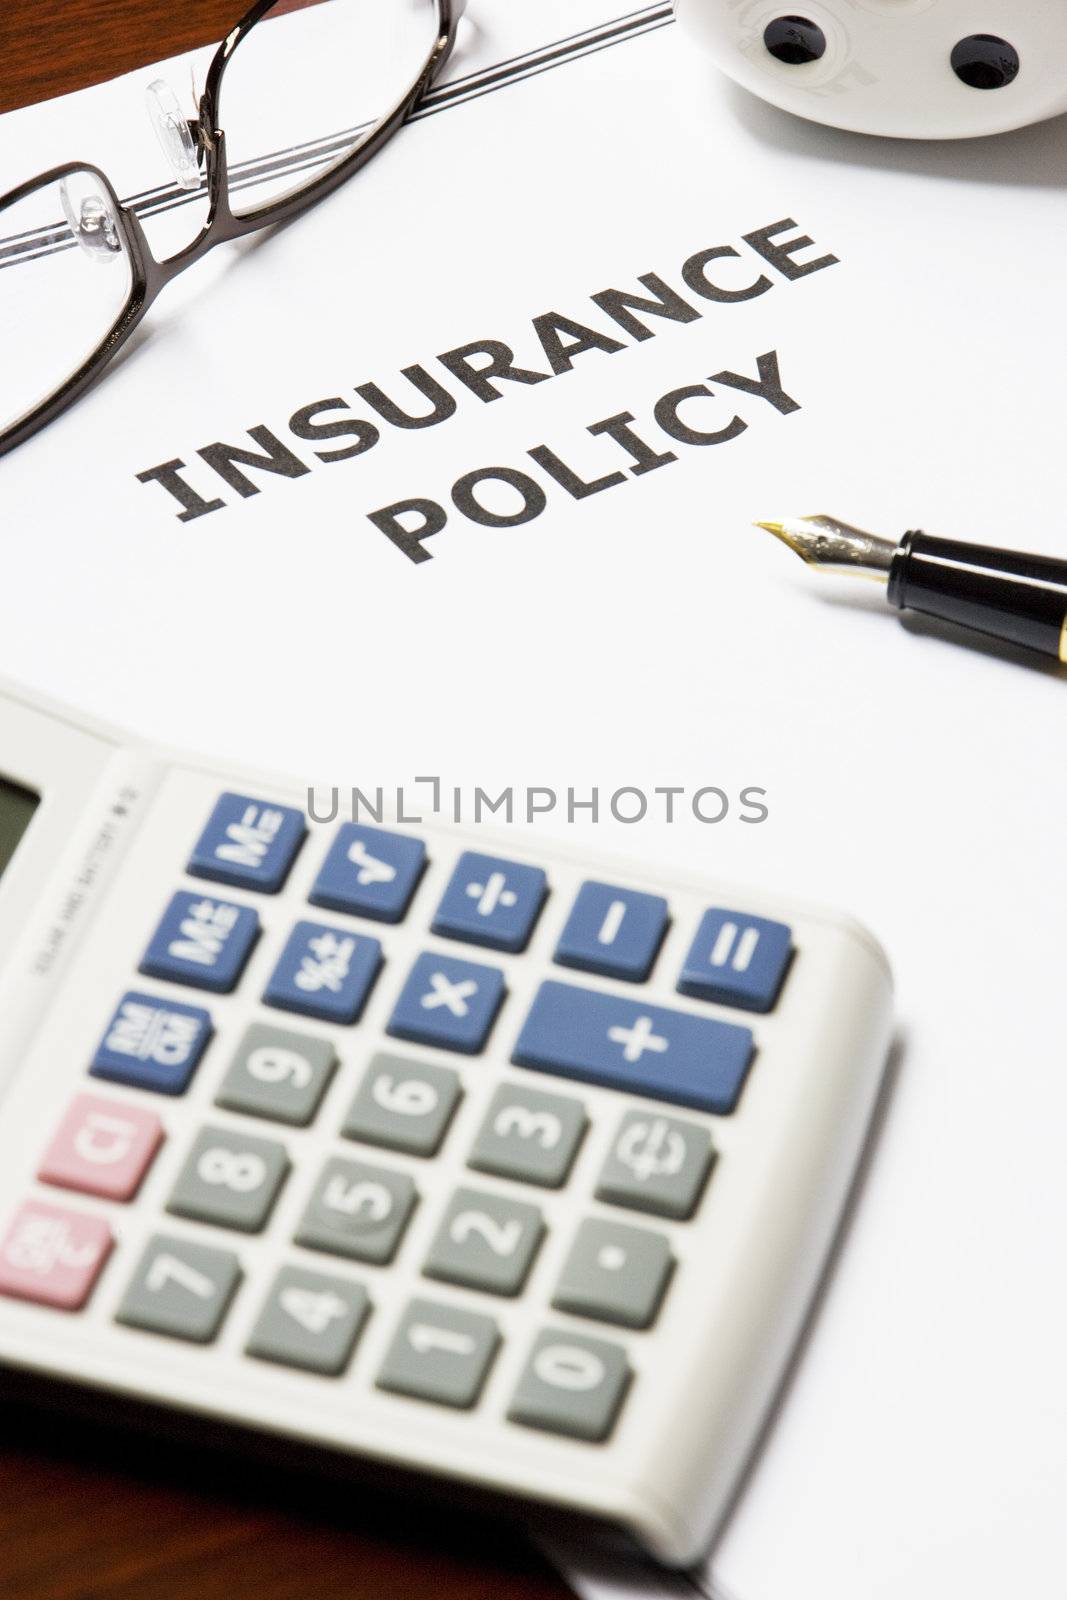 Image of an insurance policy on an office table.